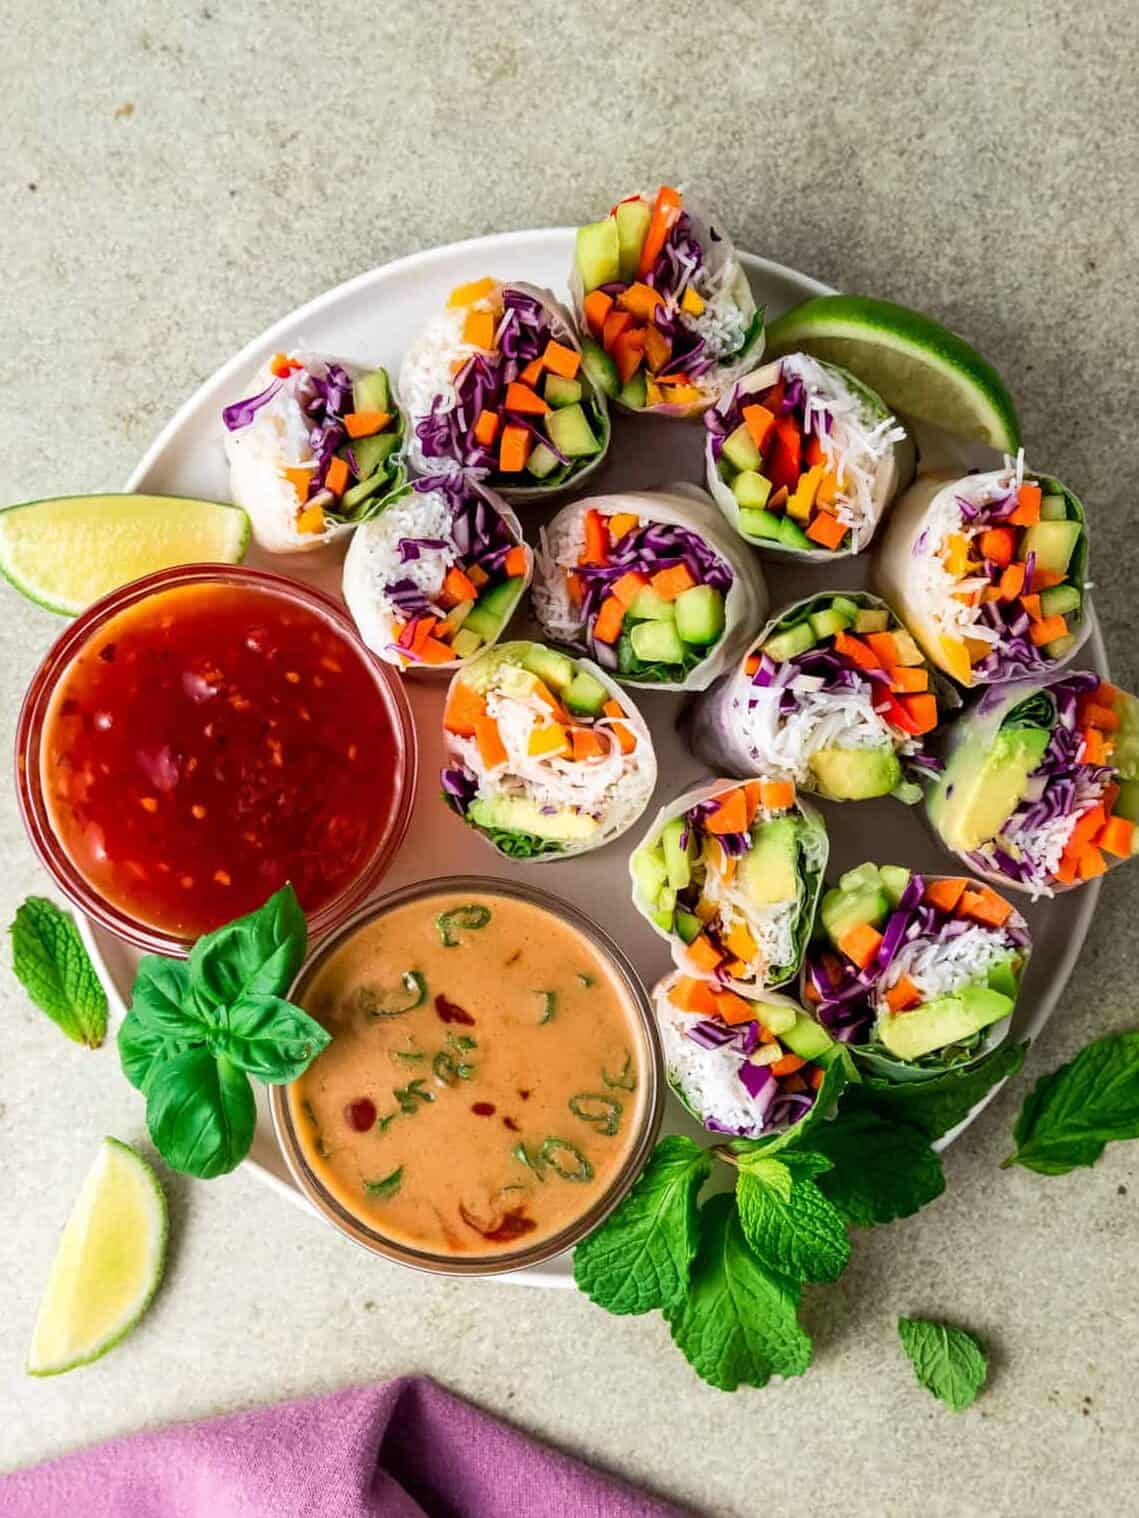 Vegetable rice paper rolls with peanut sauce and sweet chili sauce.